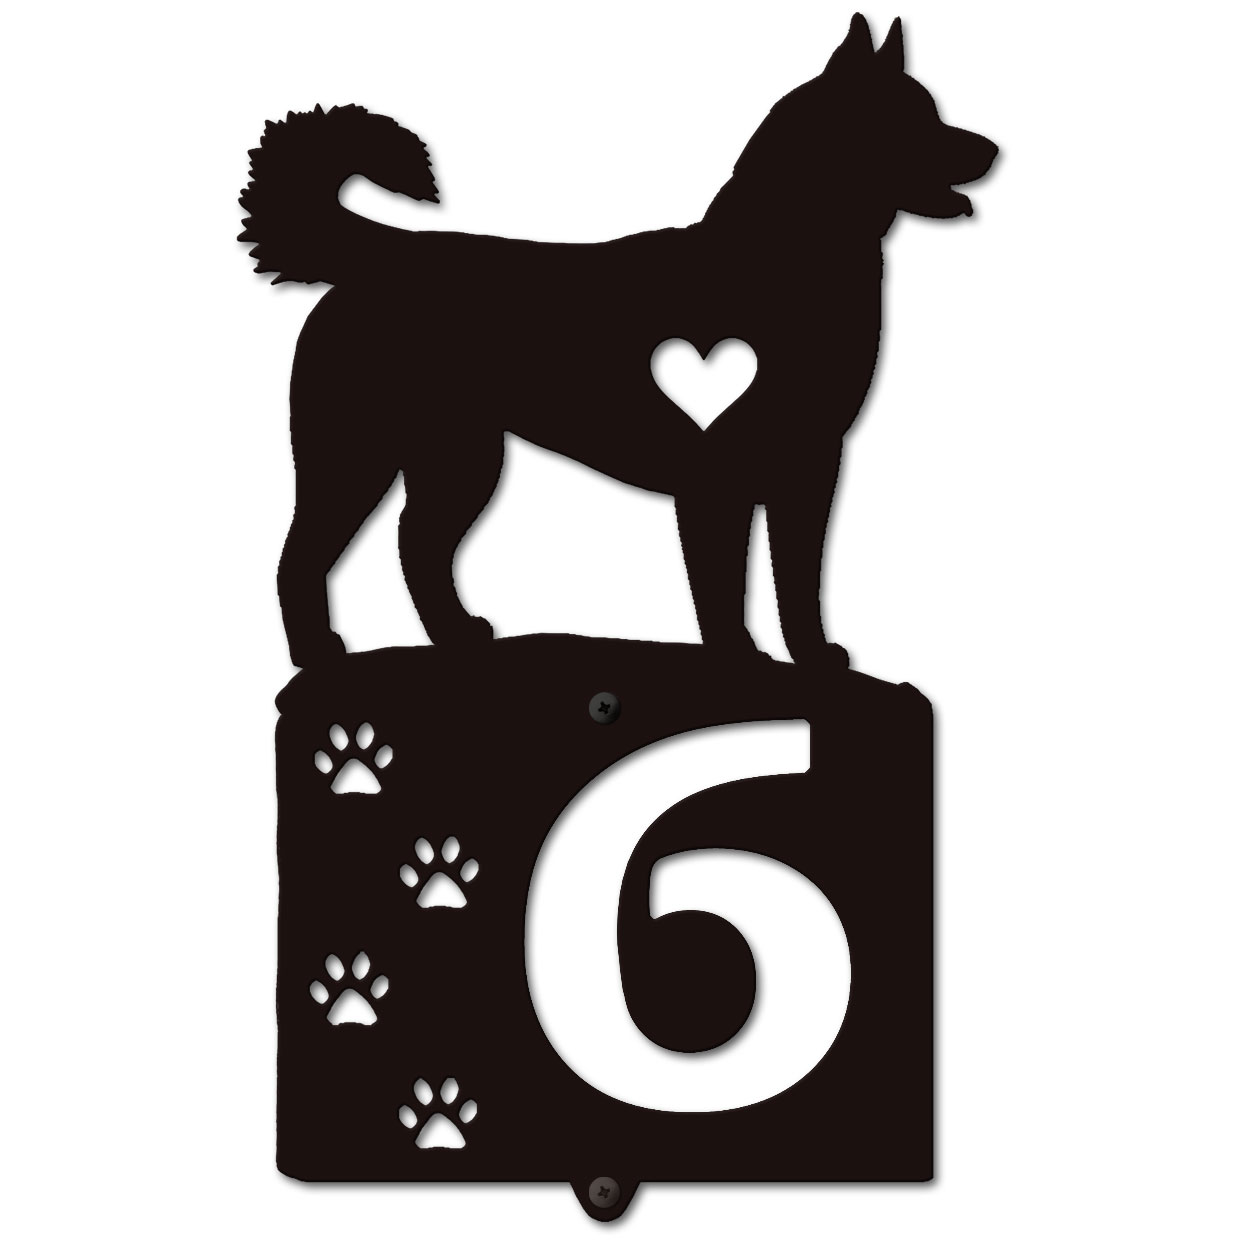 636241 - Husky Cut-Outs One Digit Address Number Plaque - Choose Size and Color